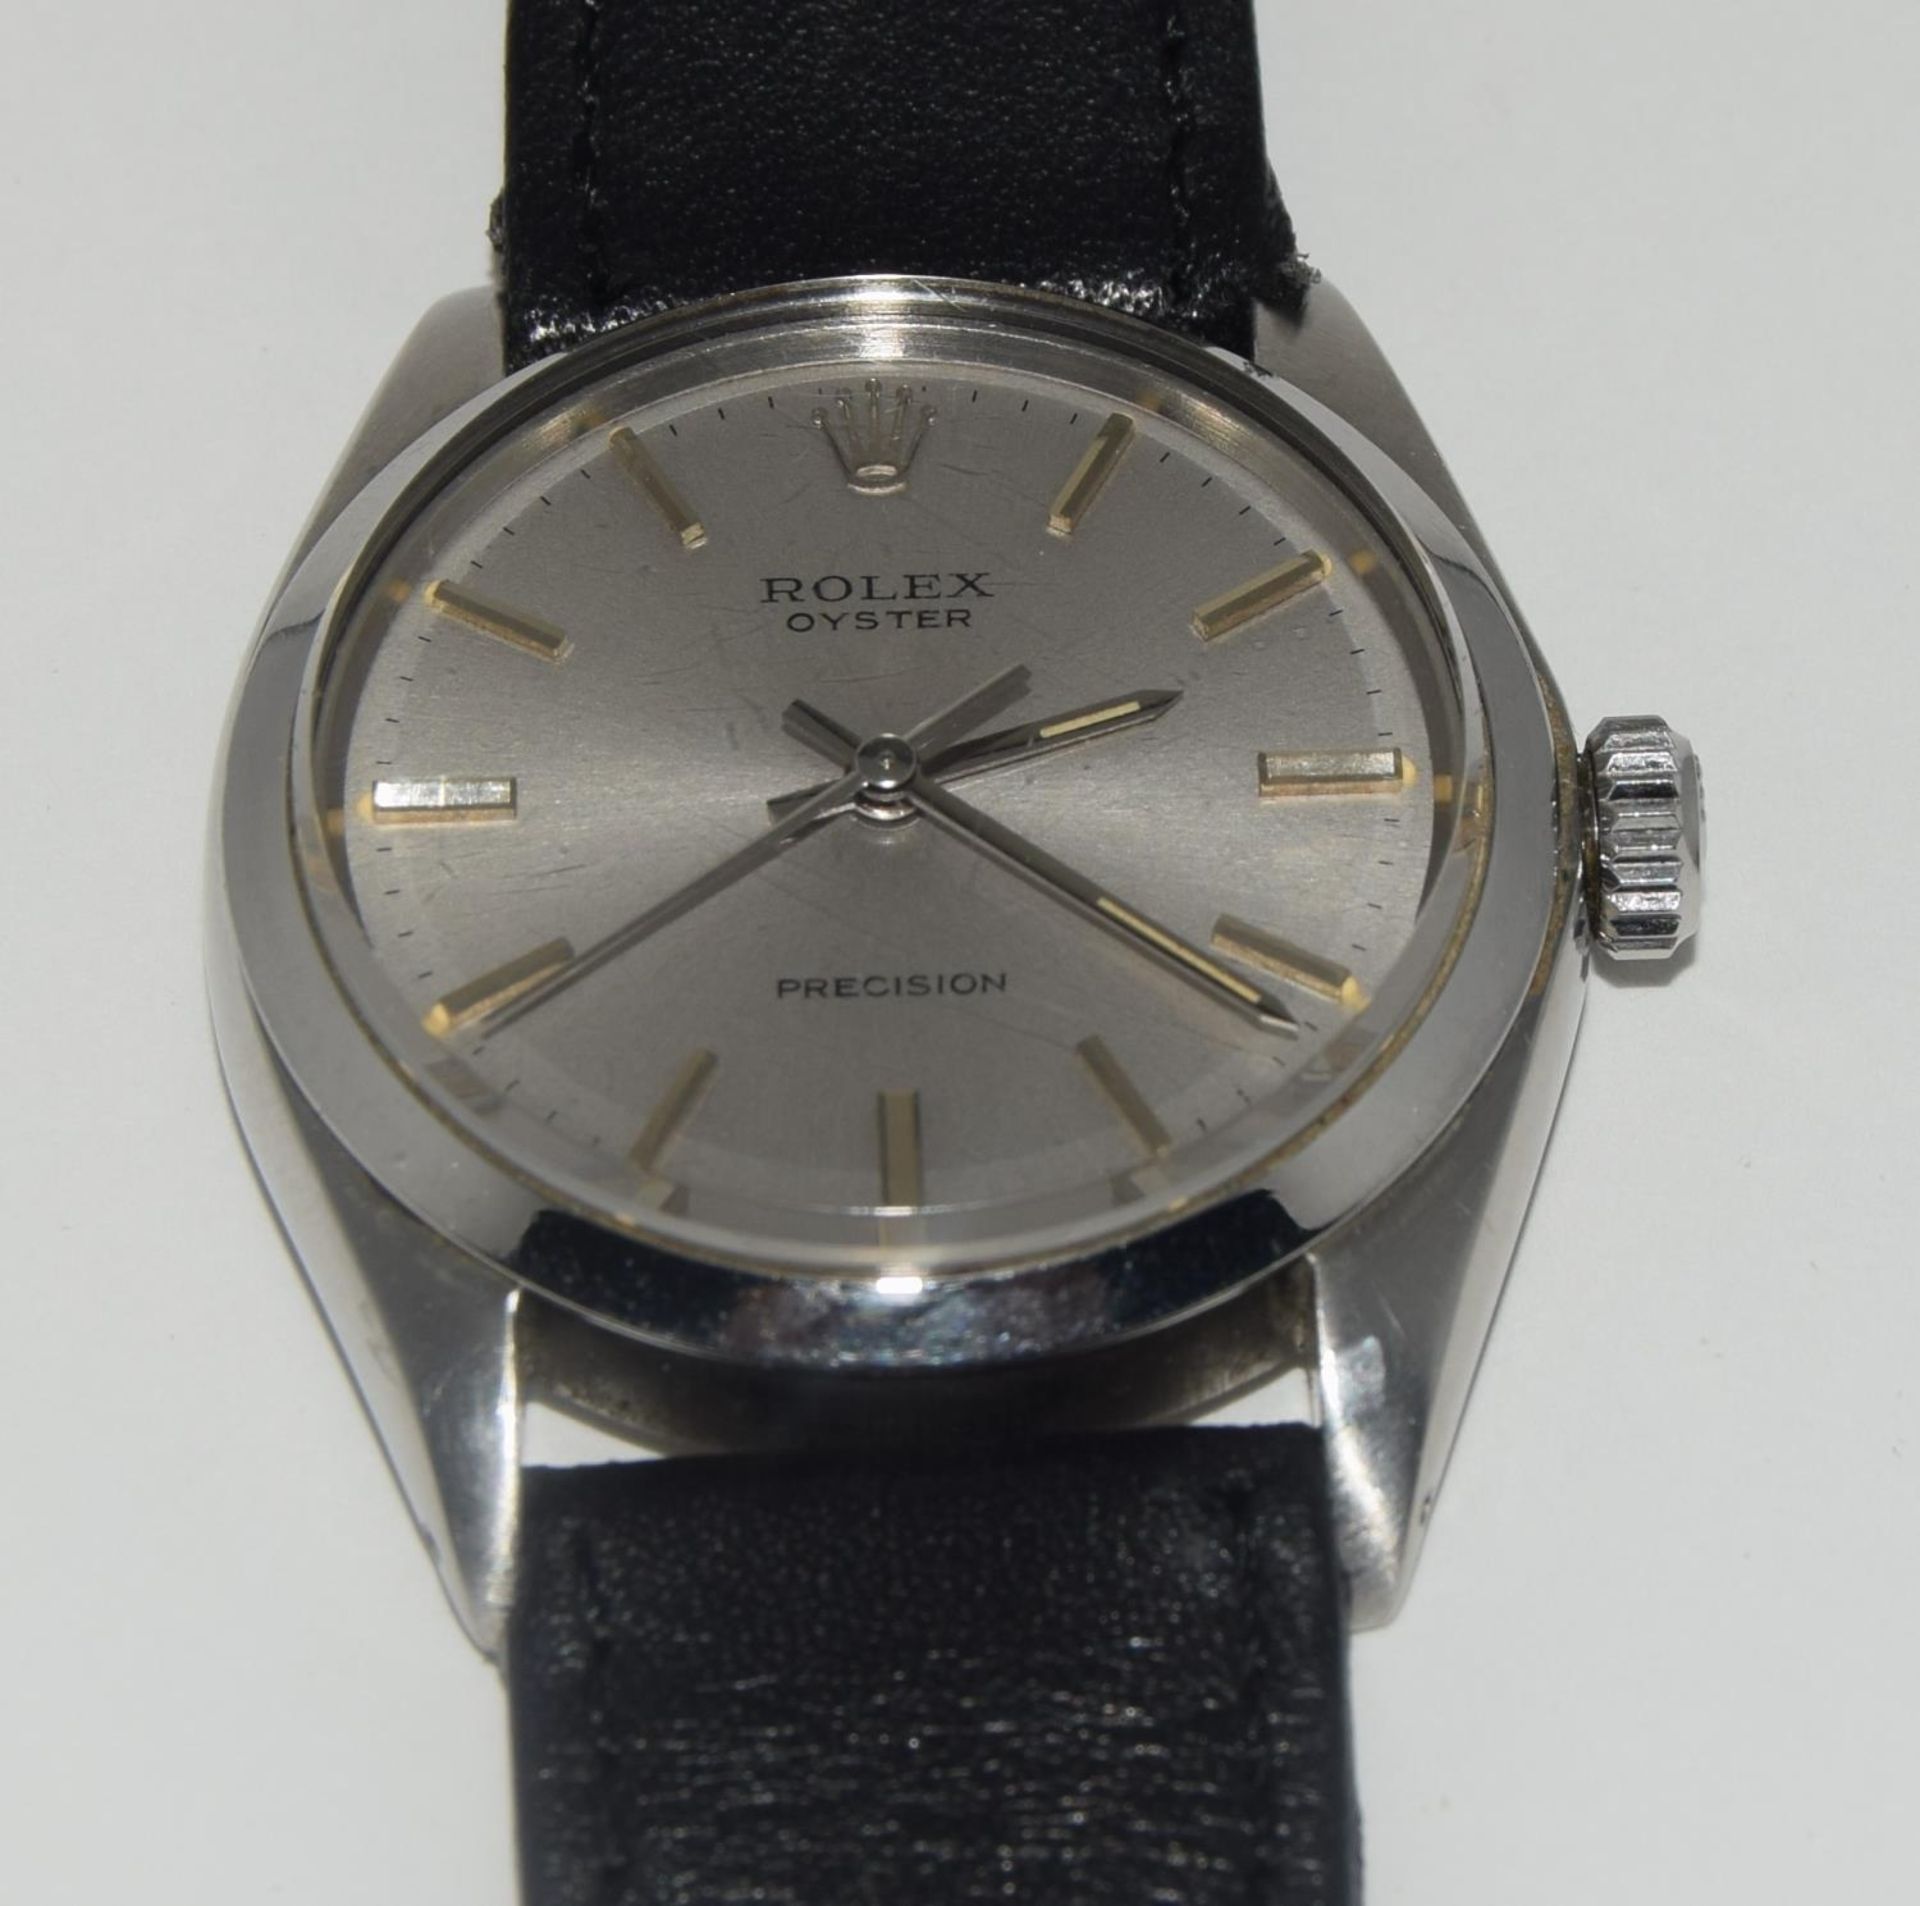 Rolex Oyster Precision silver dial Model 6426, movement 1225 year approx 1973, working condition - Image 7 of 8